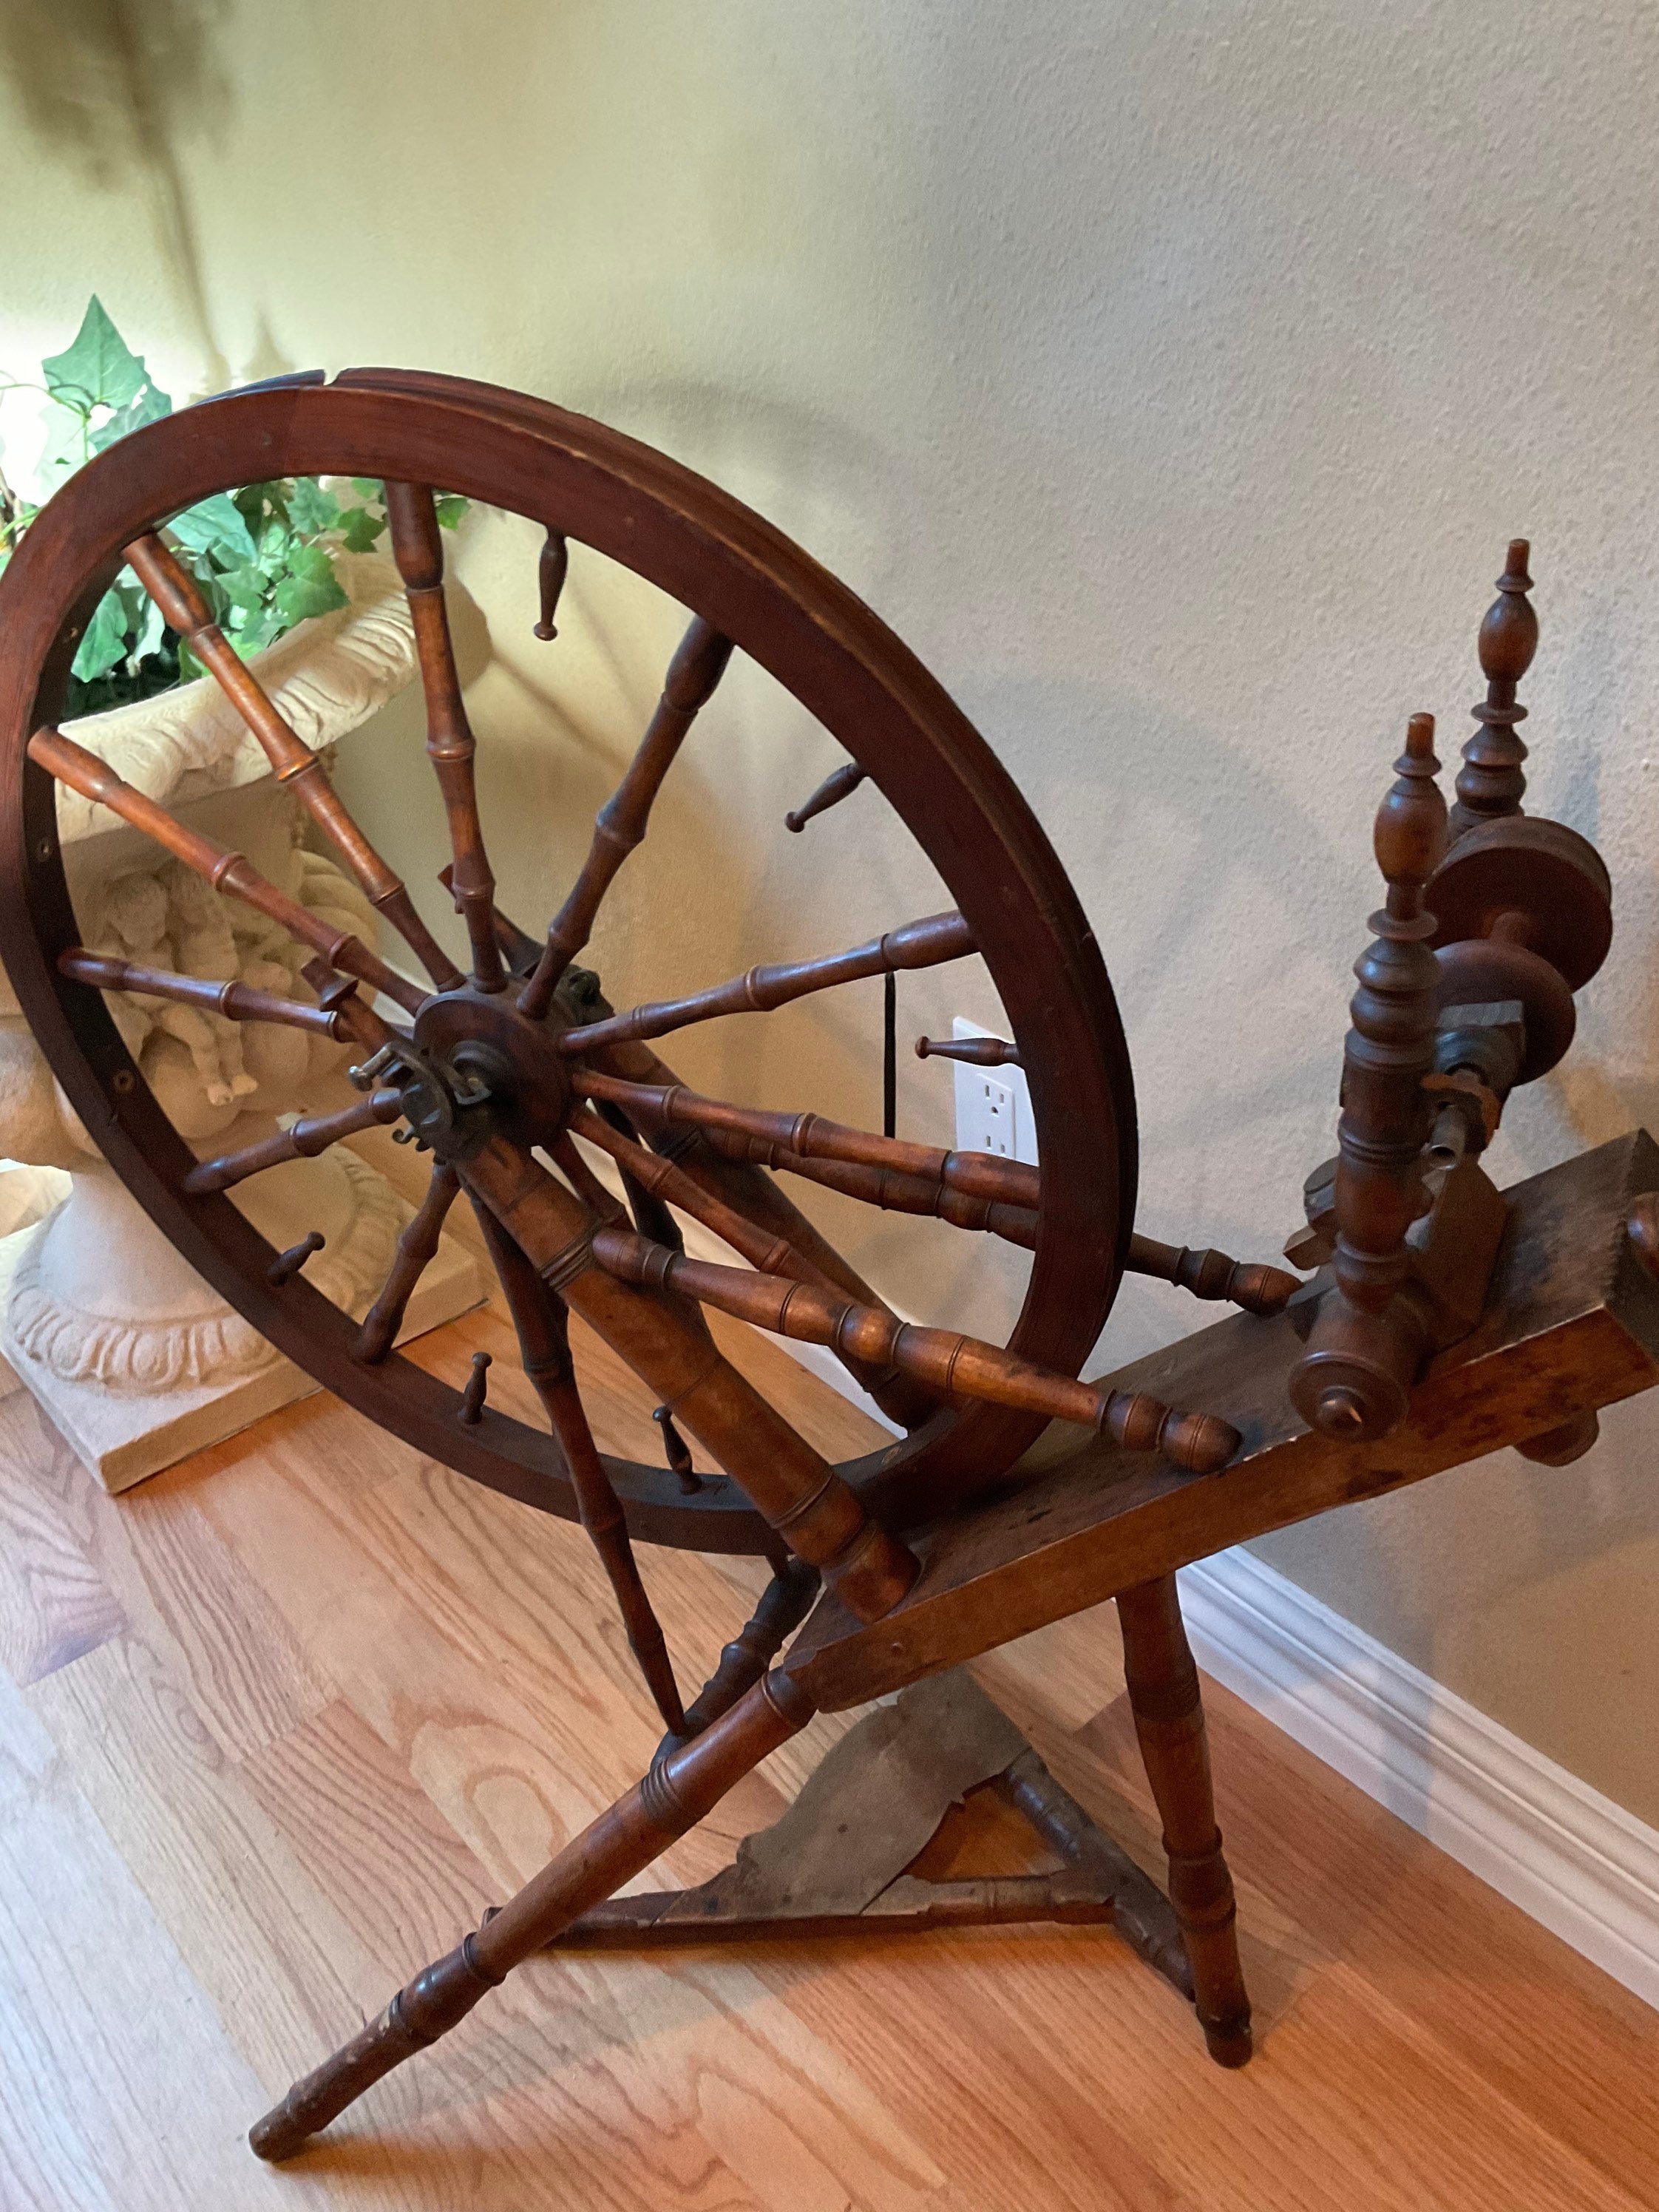 How I Restored an Antique Spinning Wheel: Part 1